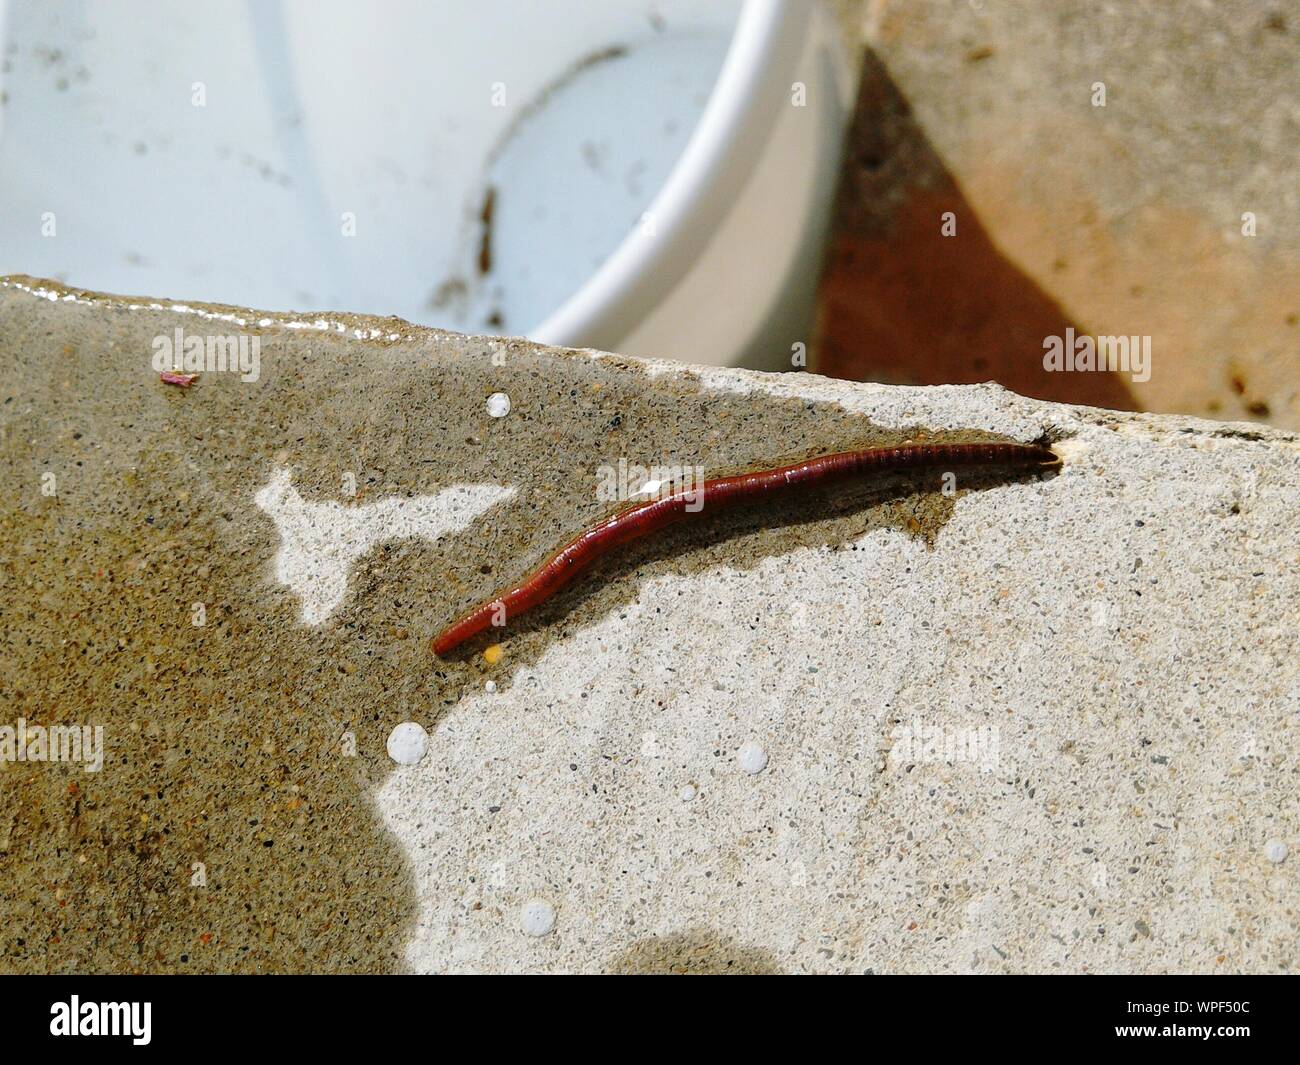 Close-up Of Earthworm On Retaining Wall Stock Photo